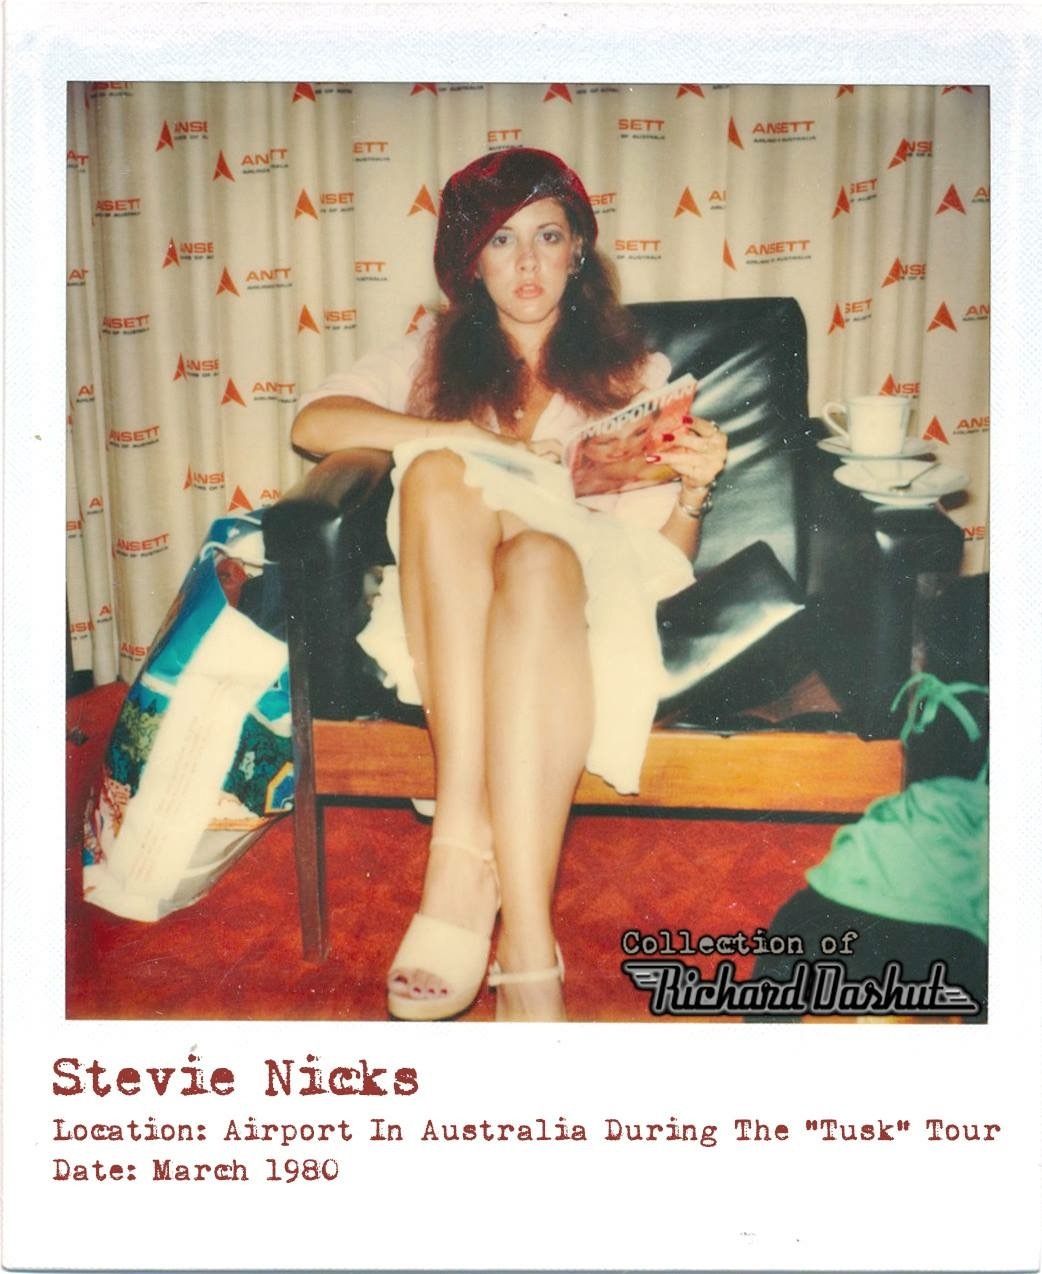 People who liked Stevie Nicks's feet, also liked.